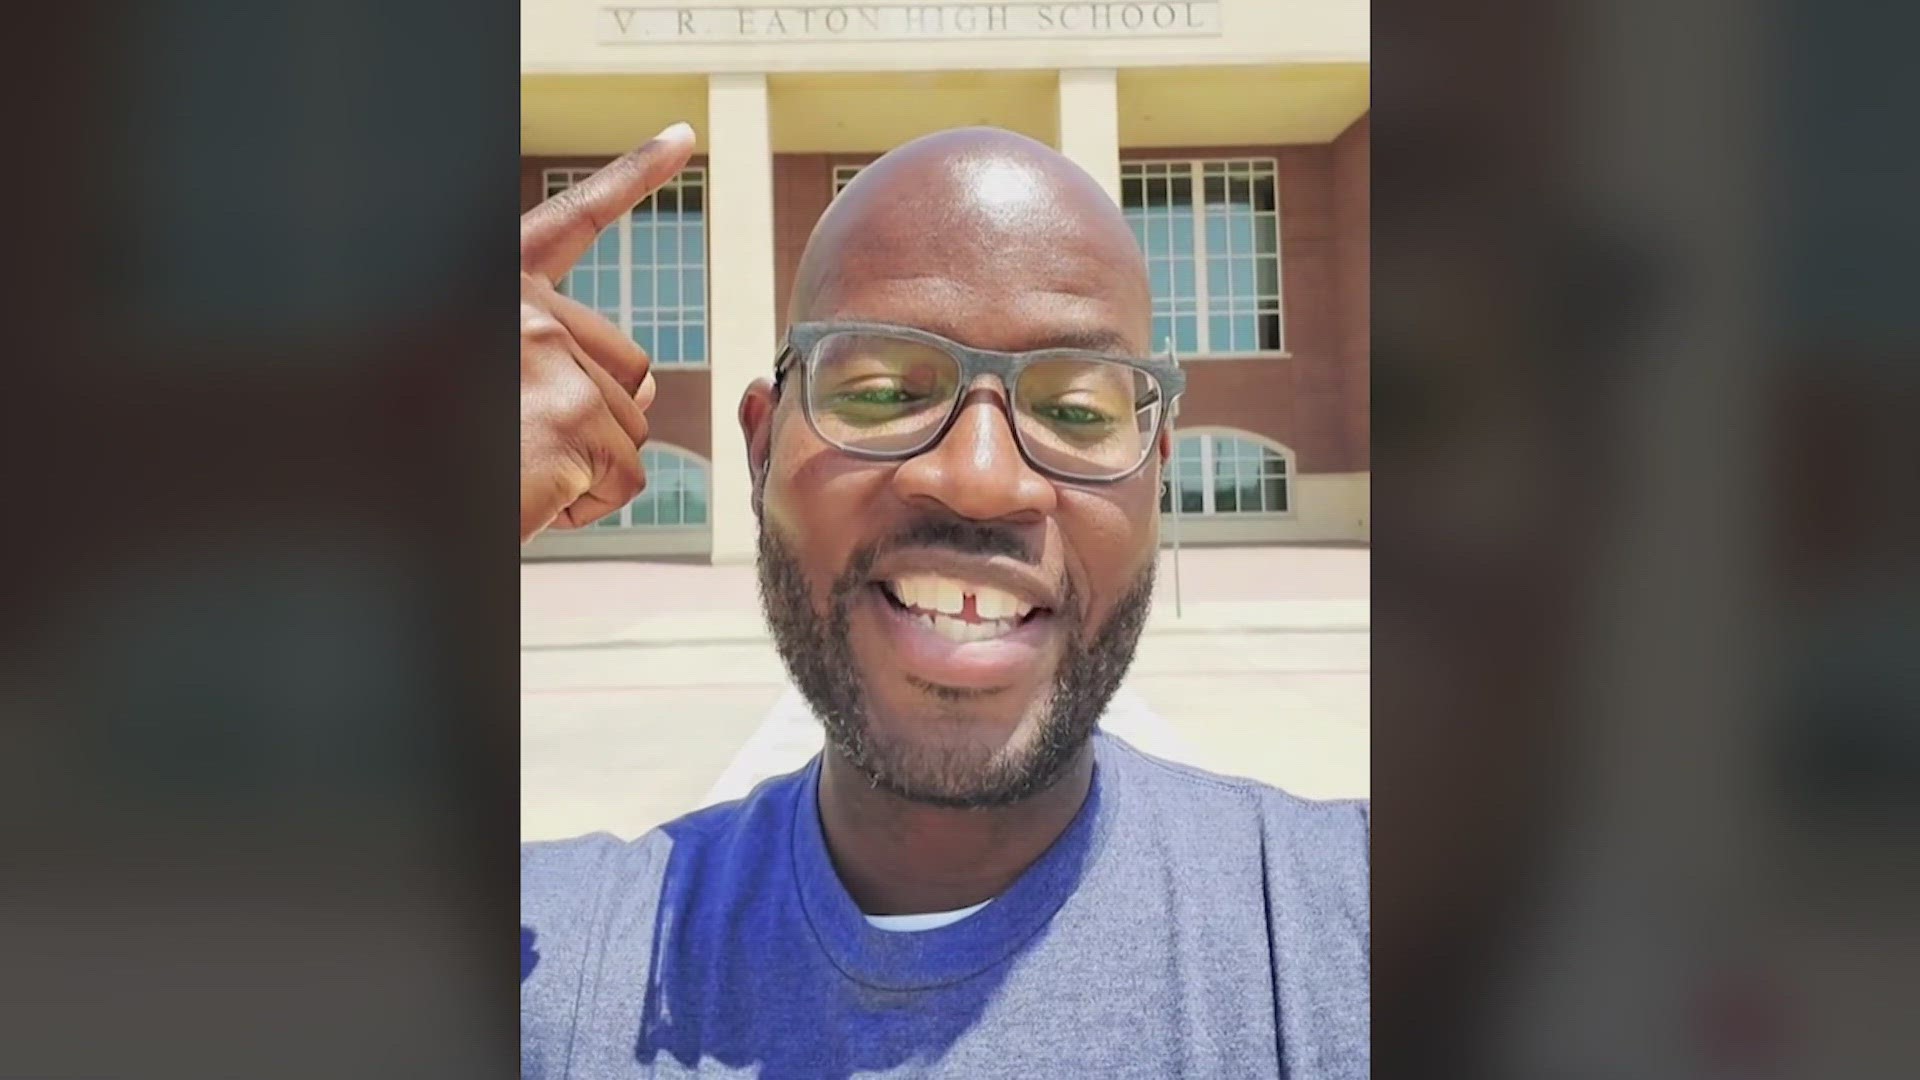 In a letter to families, the Eaton High School principal confirmed that assistant principal Mose Brown was arrested on Oct. 2.